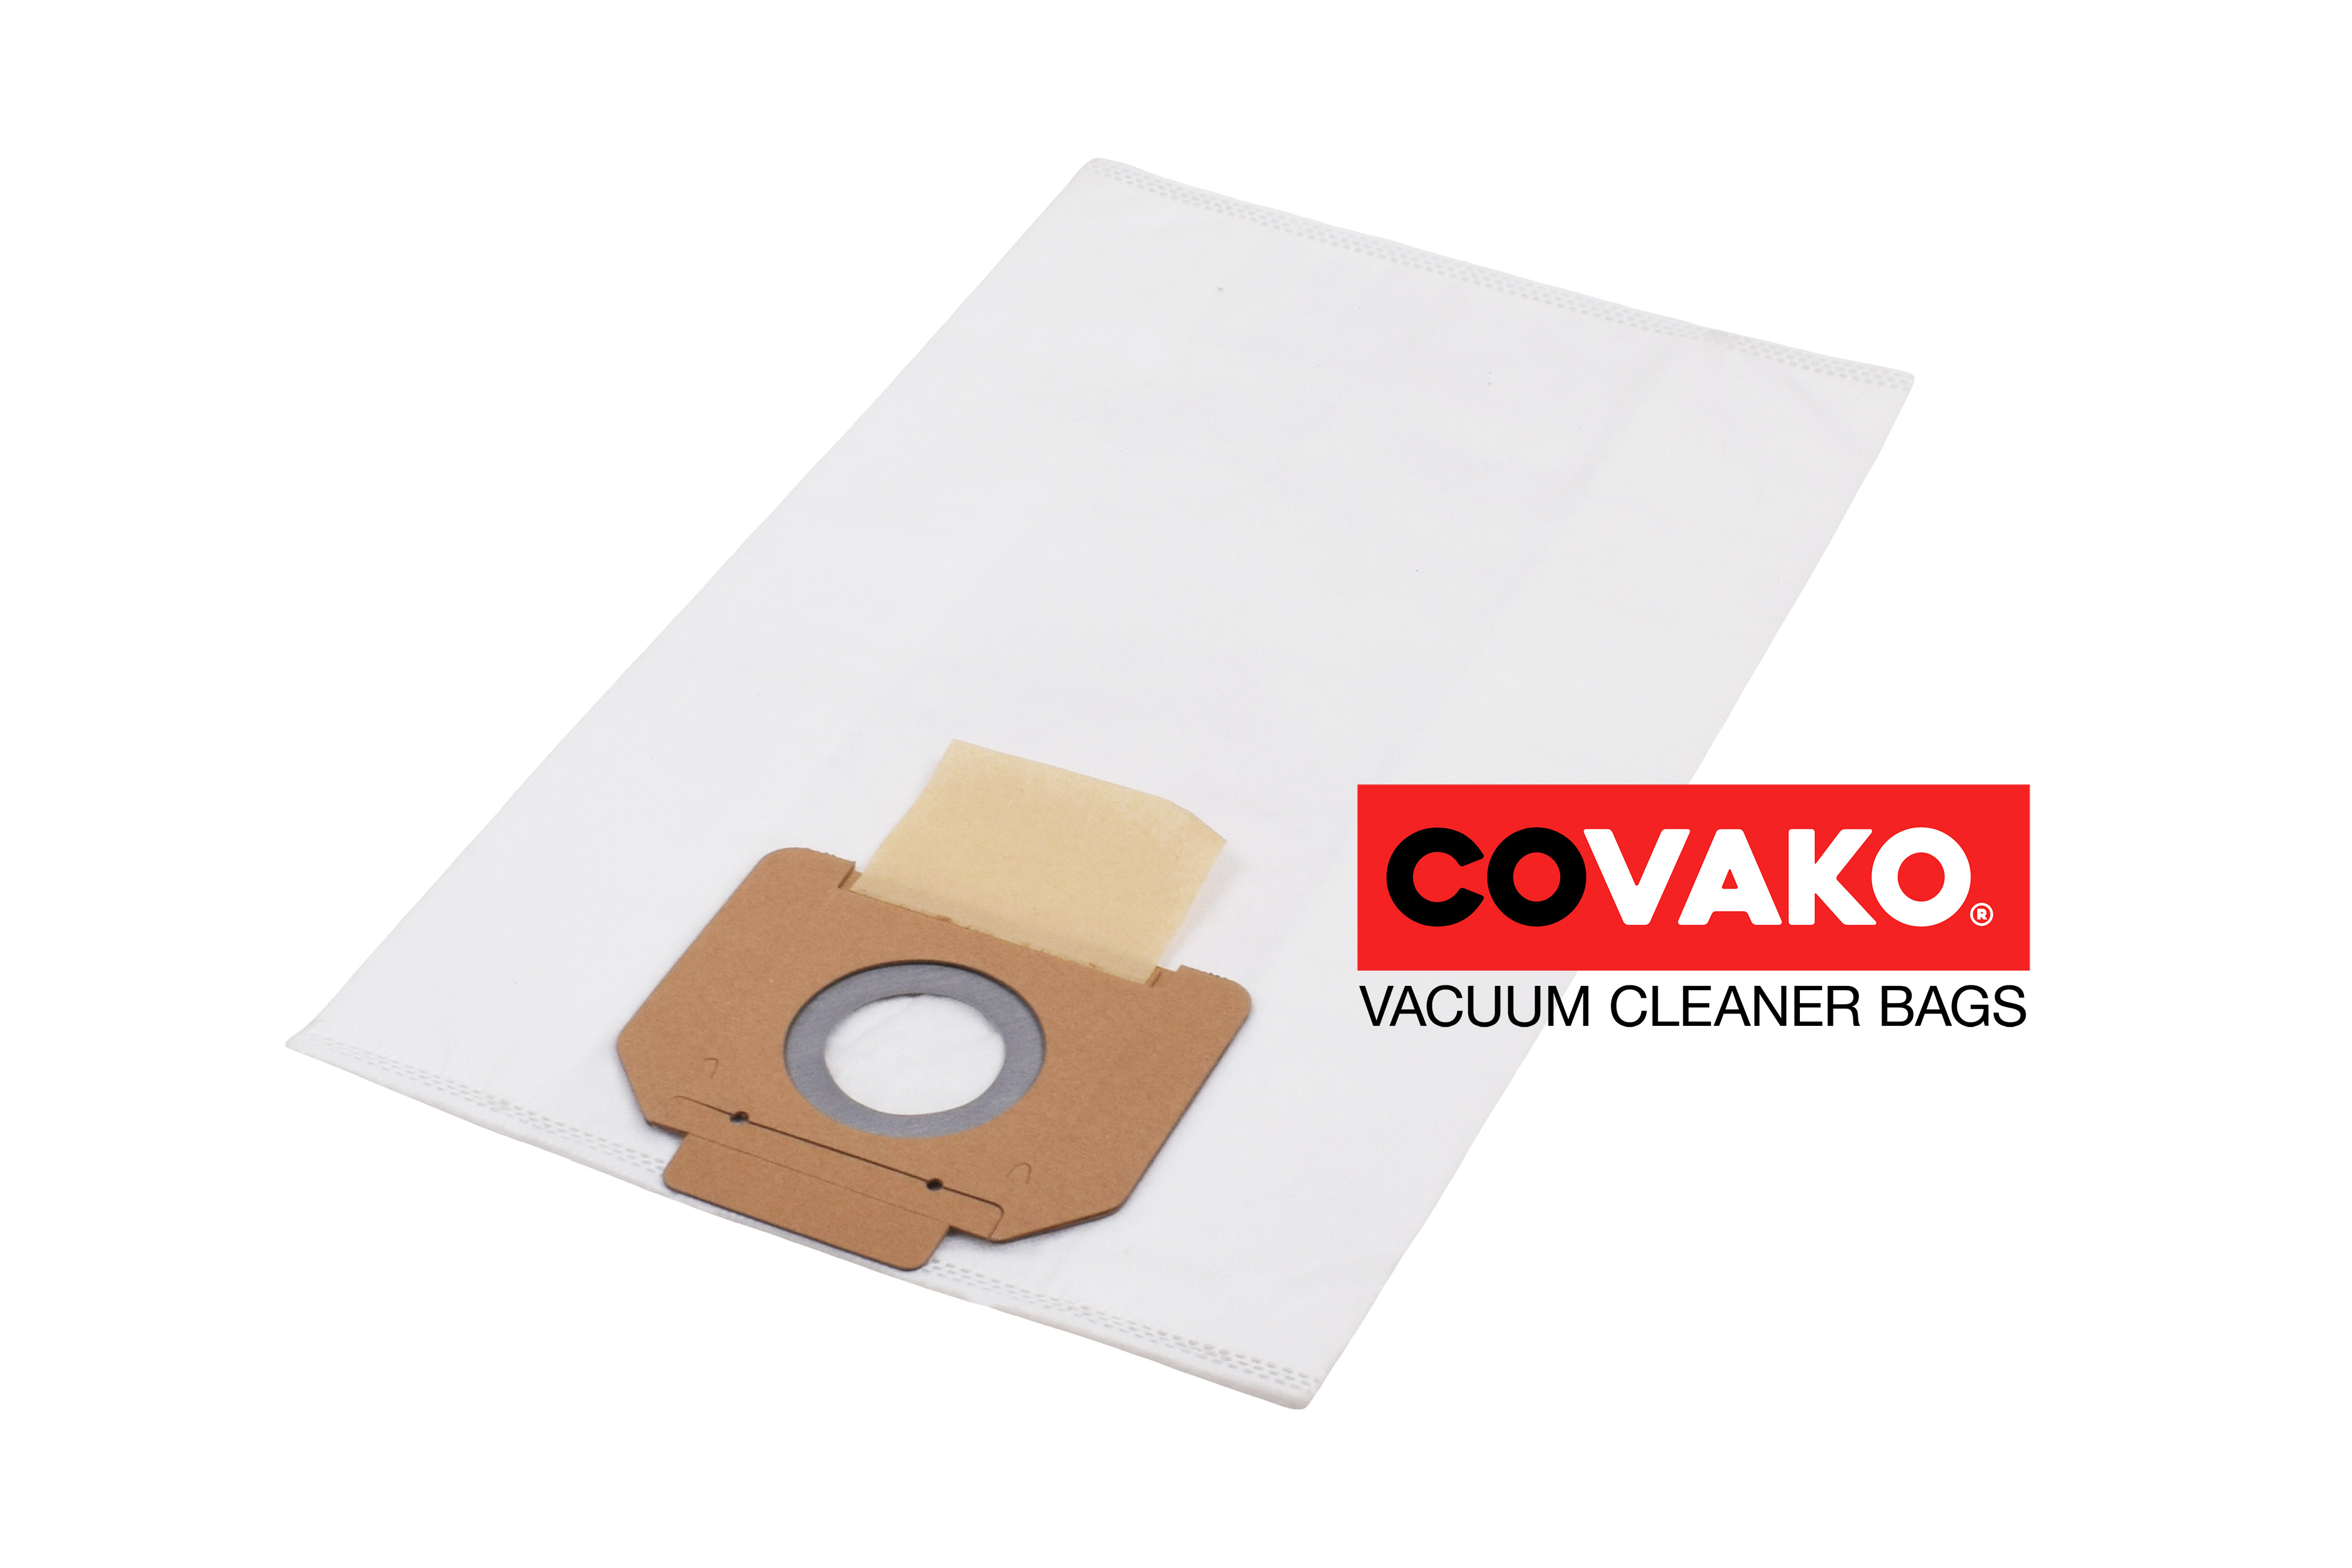 Cleancraft flexCat 111 Q B-Class / Synthesis - Cleancraft vacuum cleaner bags